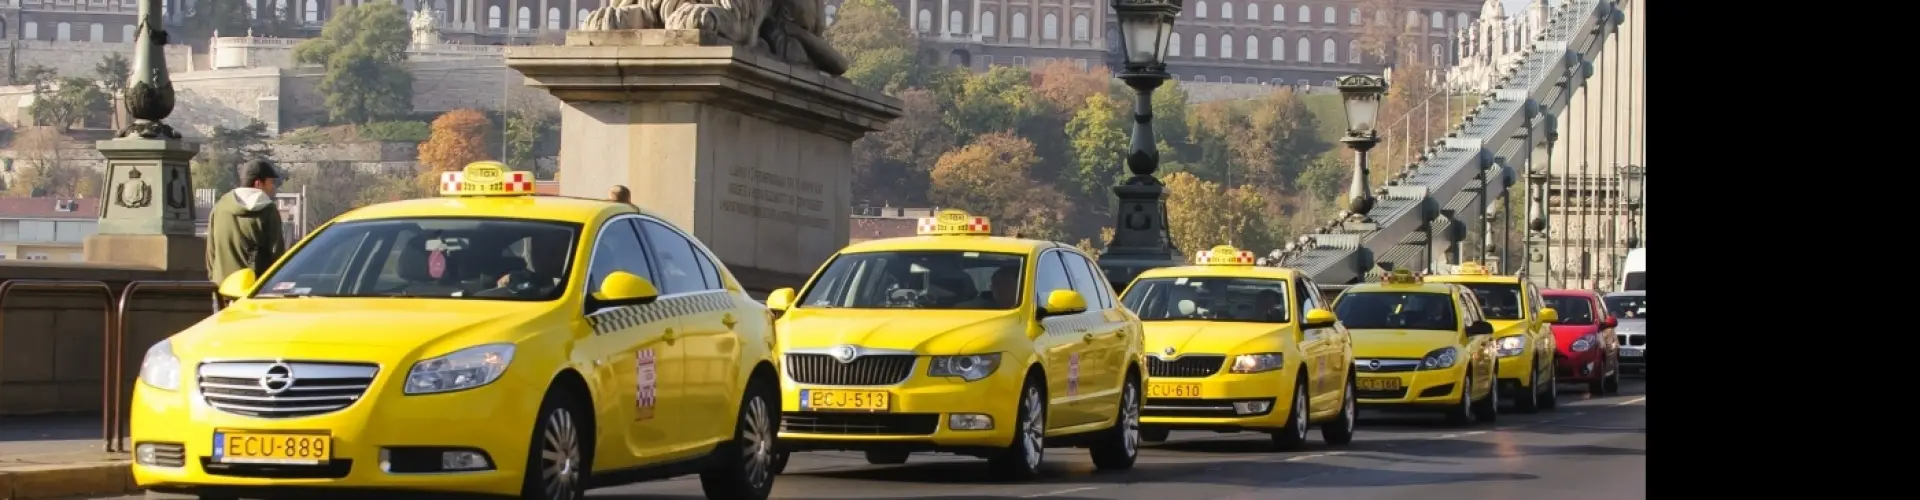 price of taxi from budapest airport to city centre - Is Budapest taxi fare cash or card